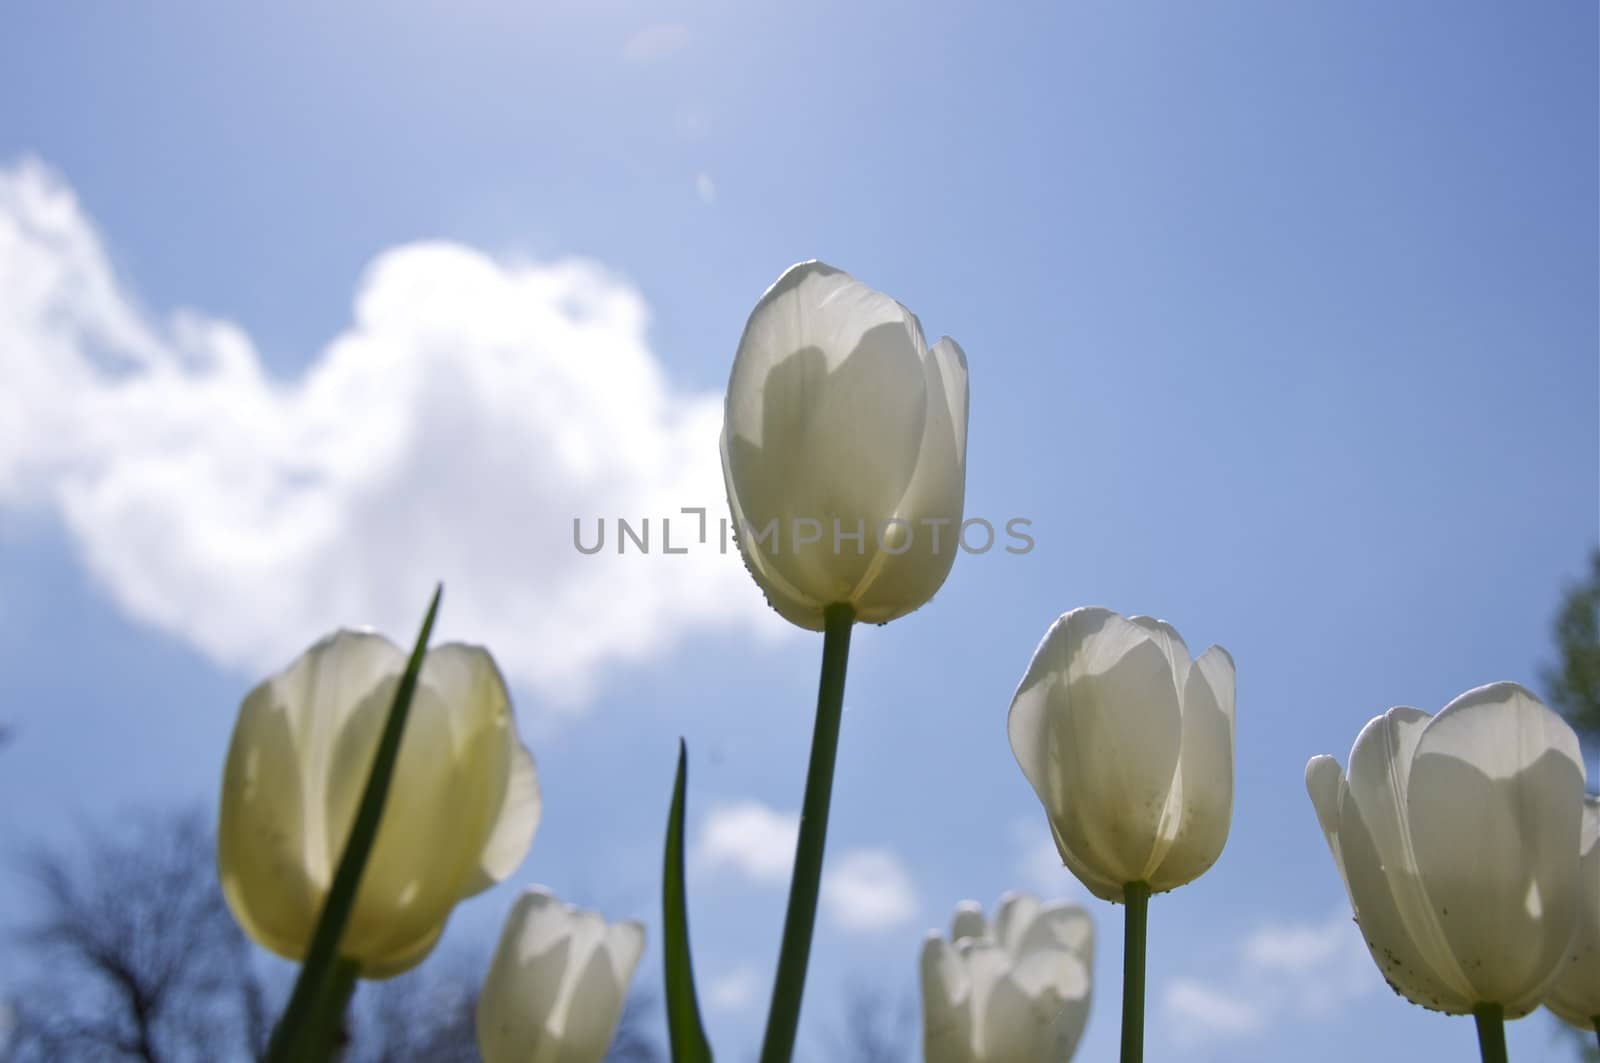 A group of pretty white tulips shine in the spring sunlight.